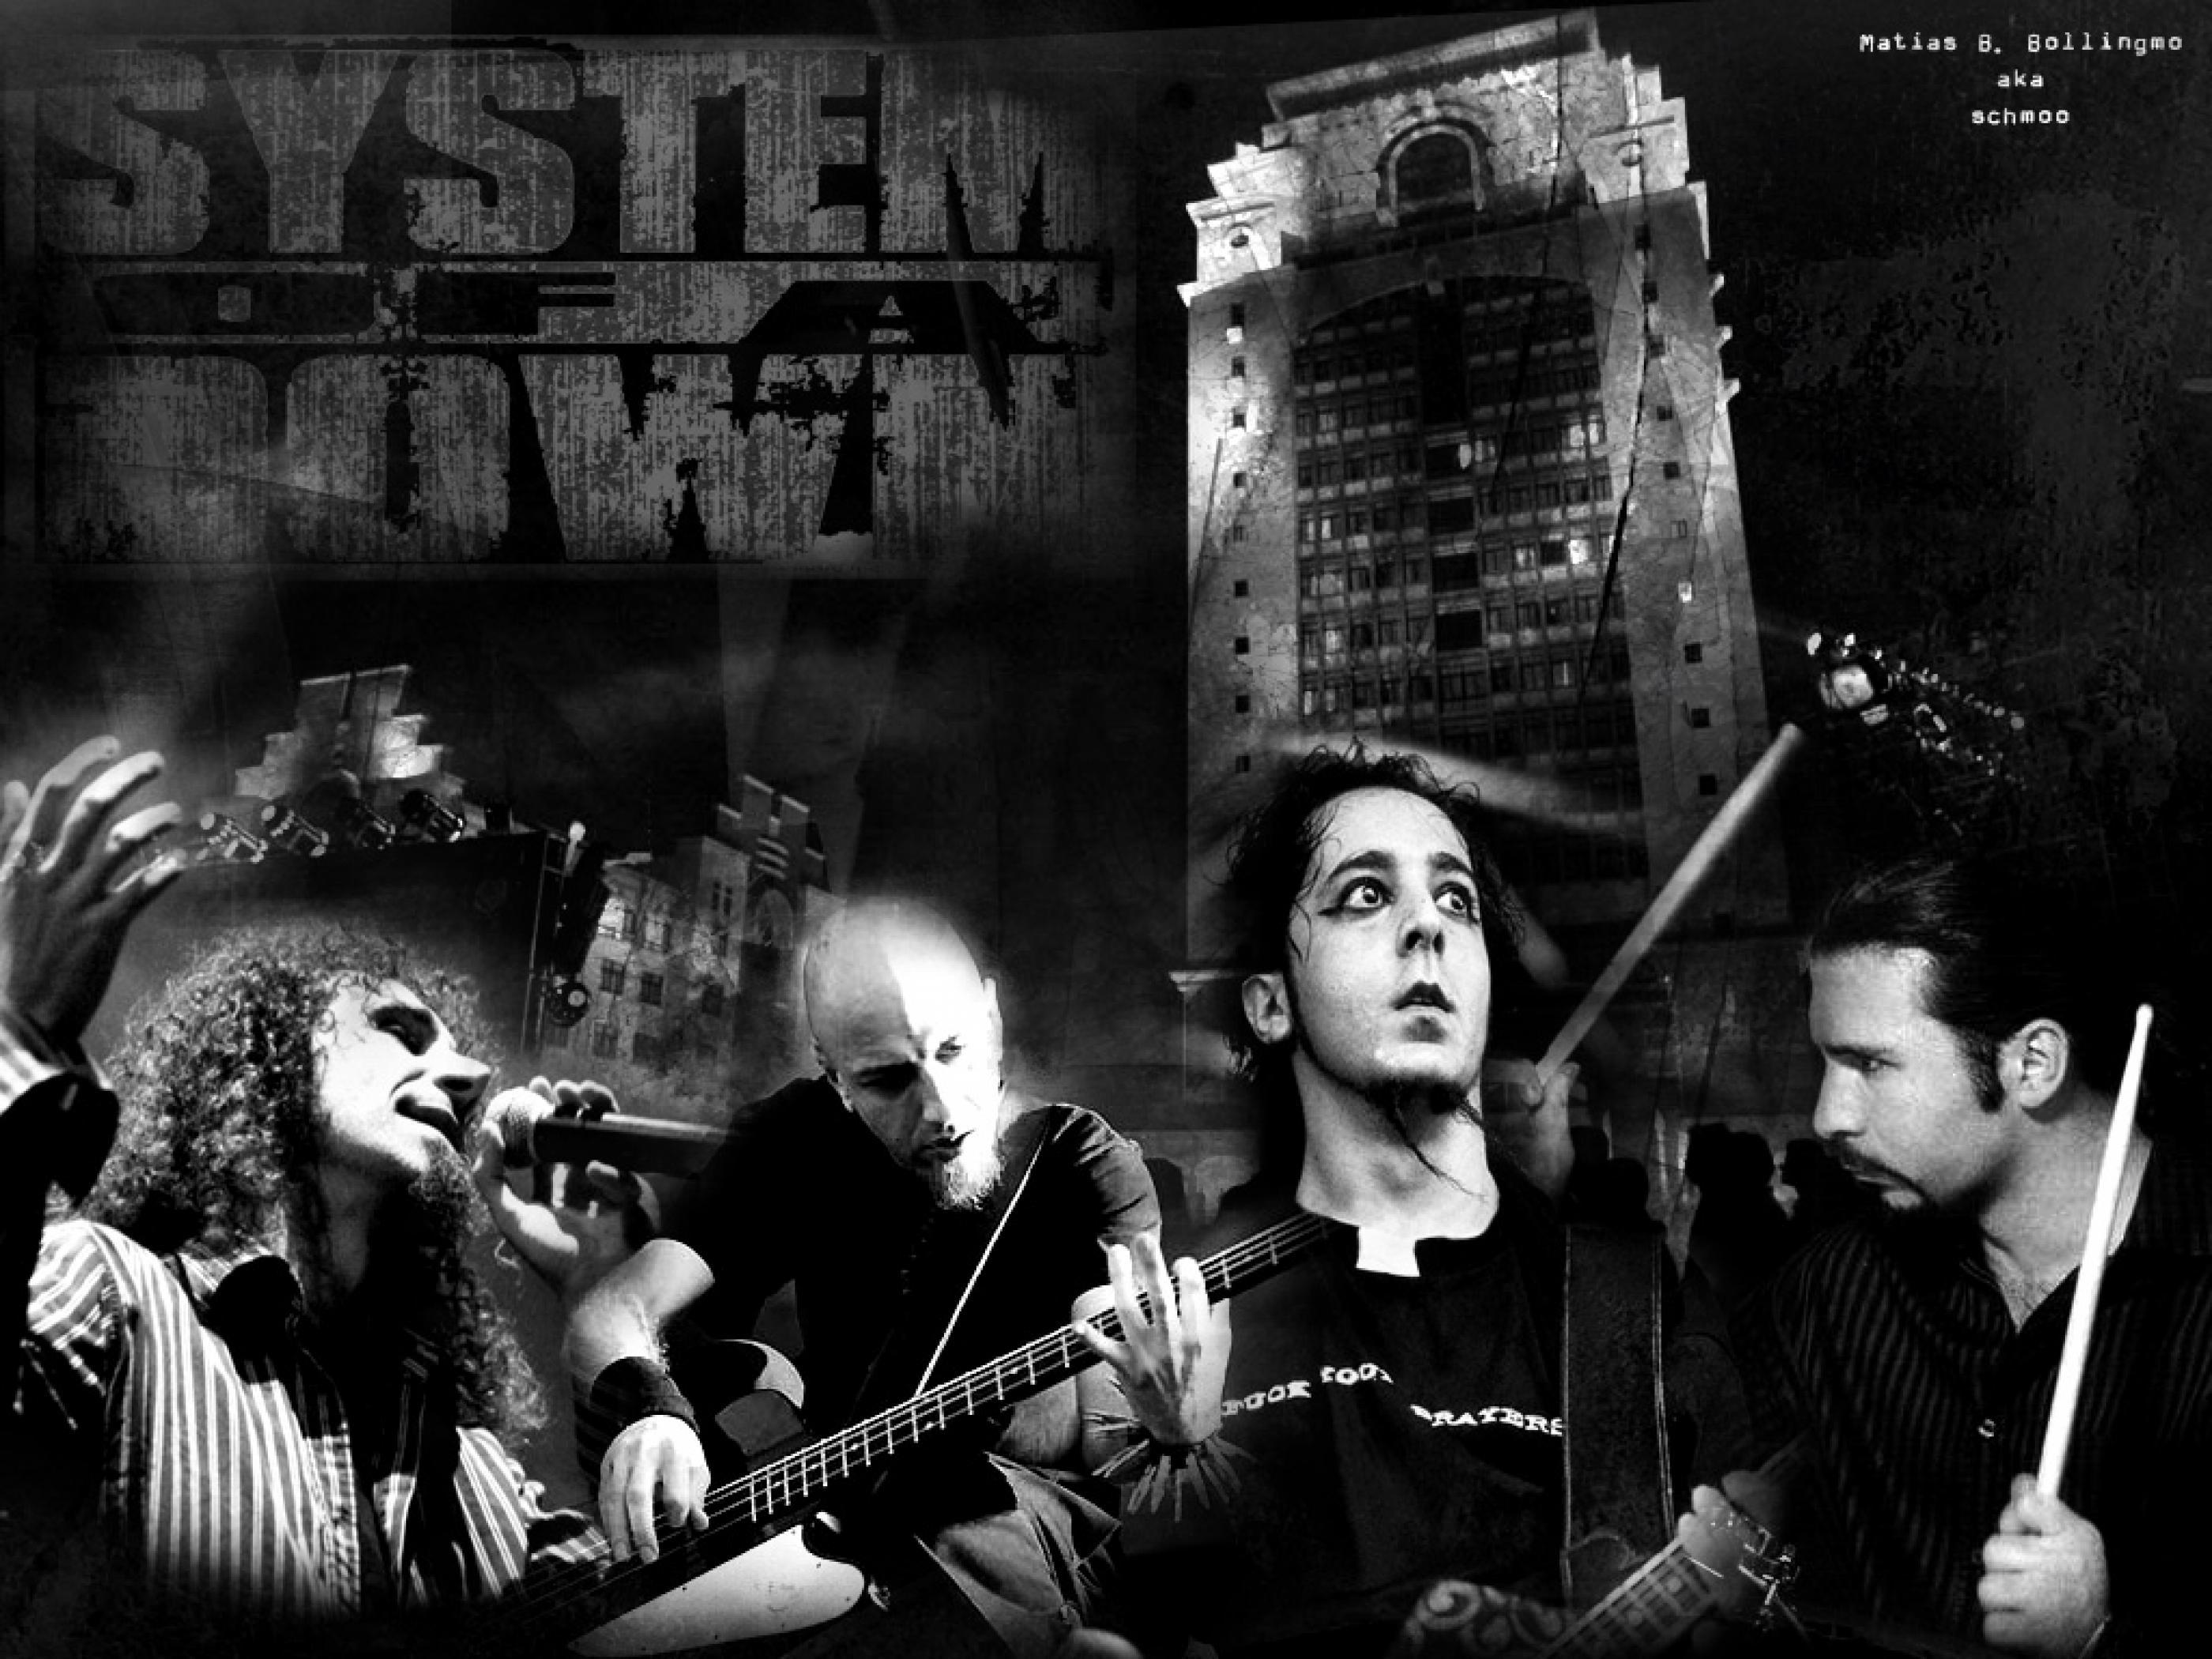 Группа System of a down. SOAD обои. System of a down Wallpaper. System of a down состав. System of a down википедия